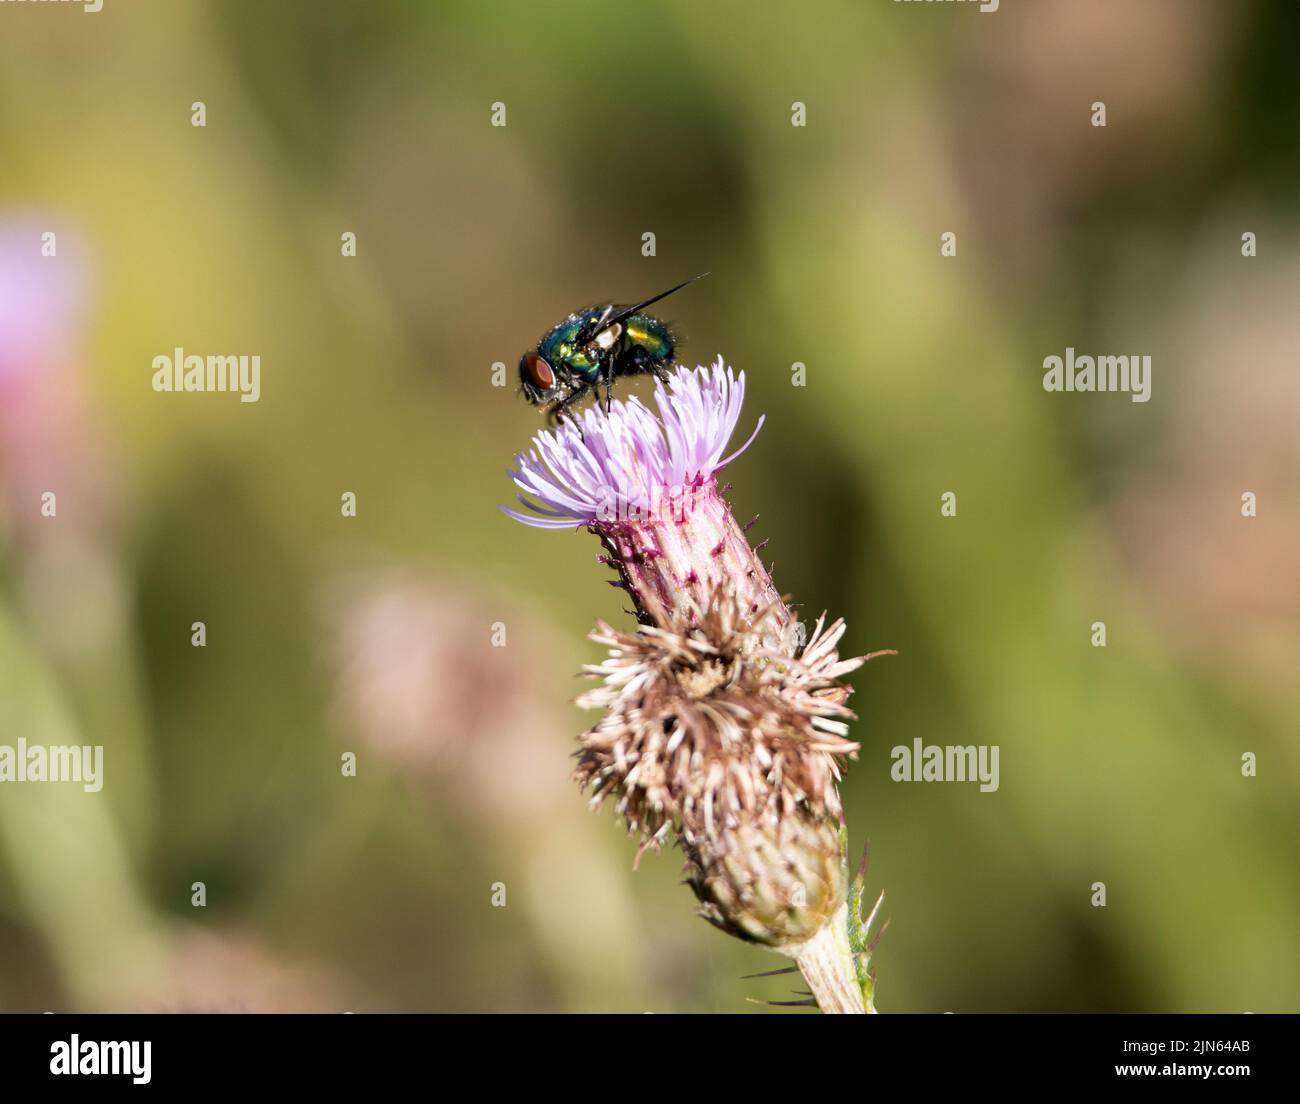 The commonest of the shiny green blowflies, the Greenbottle is abundant and widespread but rarely enters households. They breed in carrion. Stock Photo